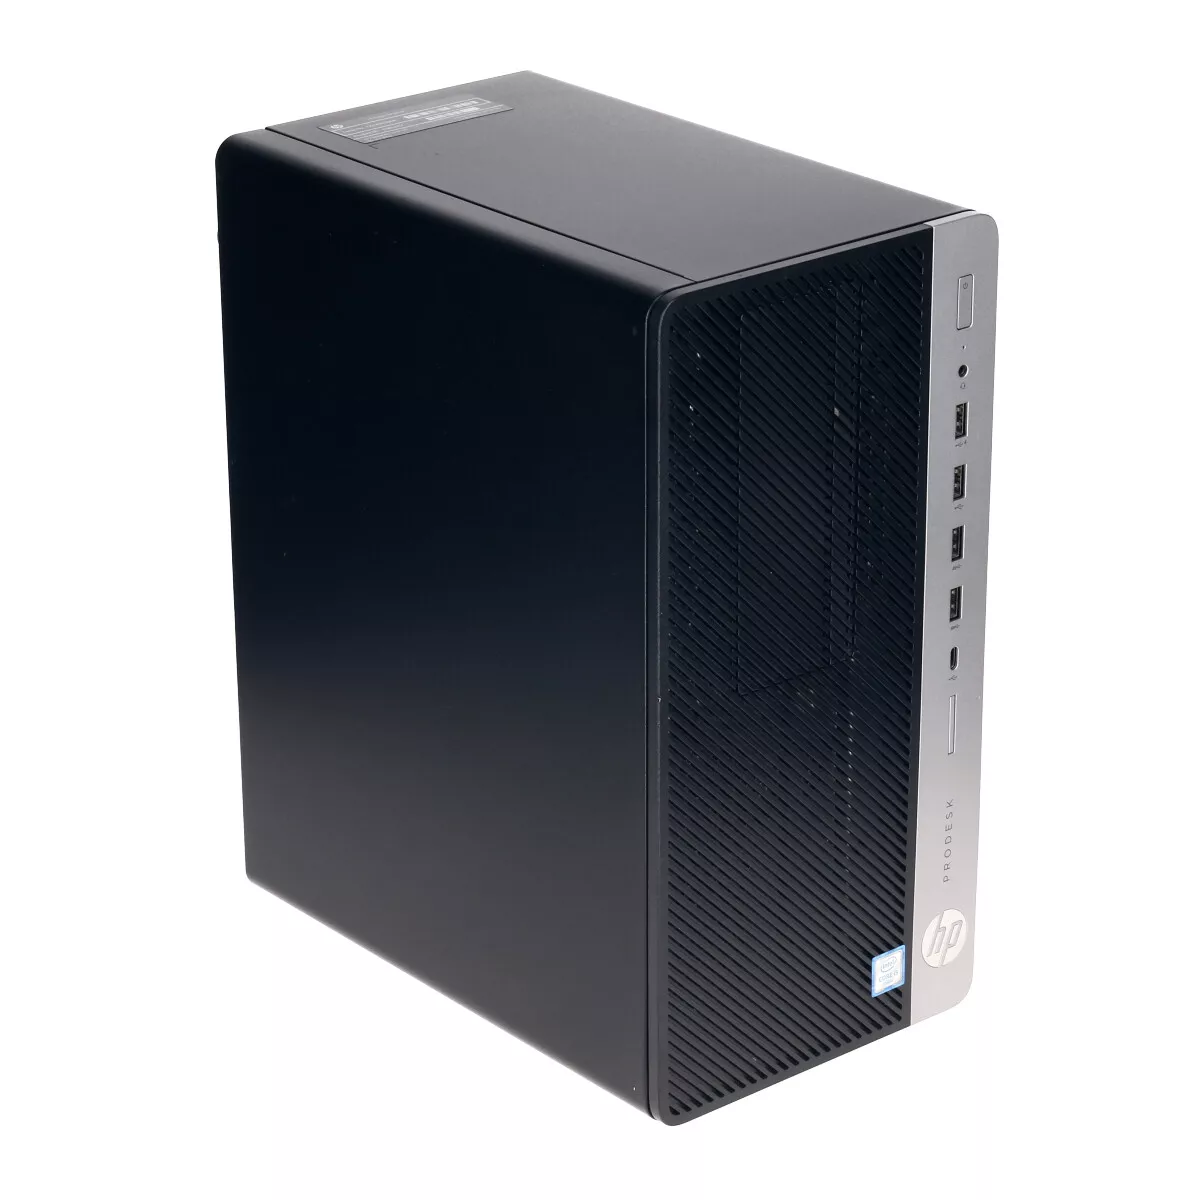 HP ProDesk 600 G4 Miditower Core i3 8100 8 GB 240 GB M.2 SSD A+